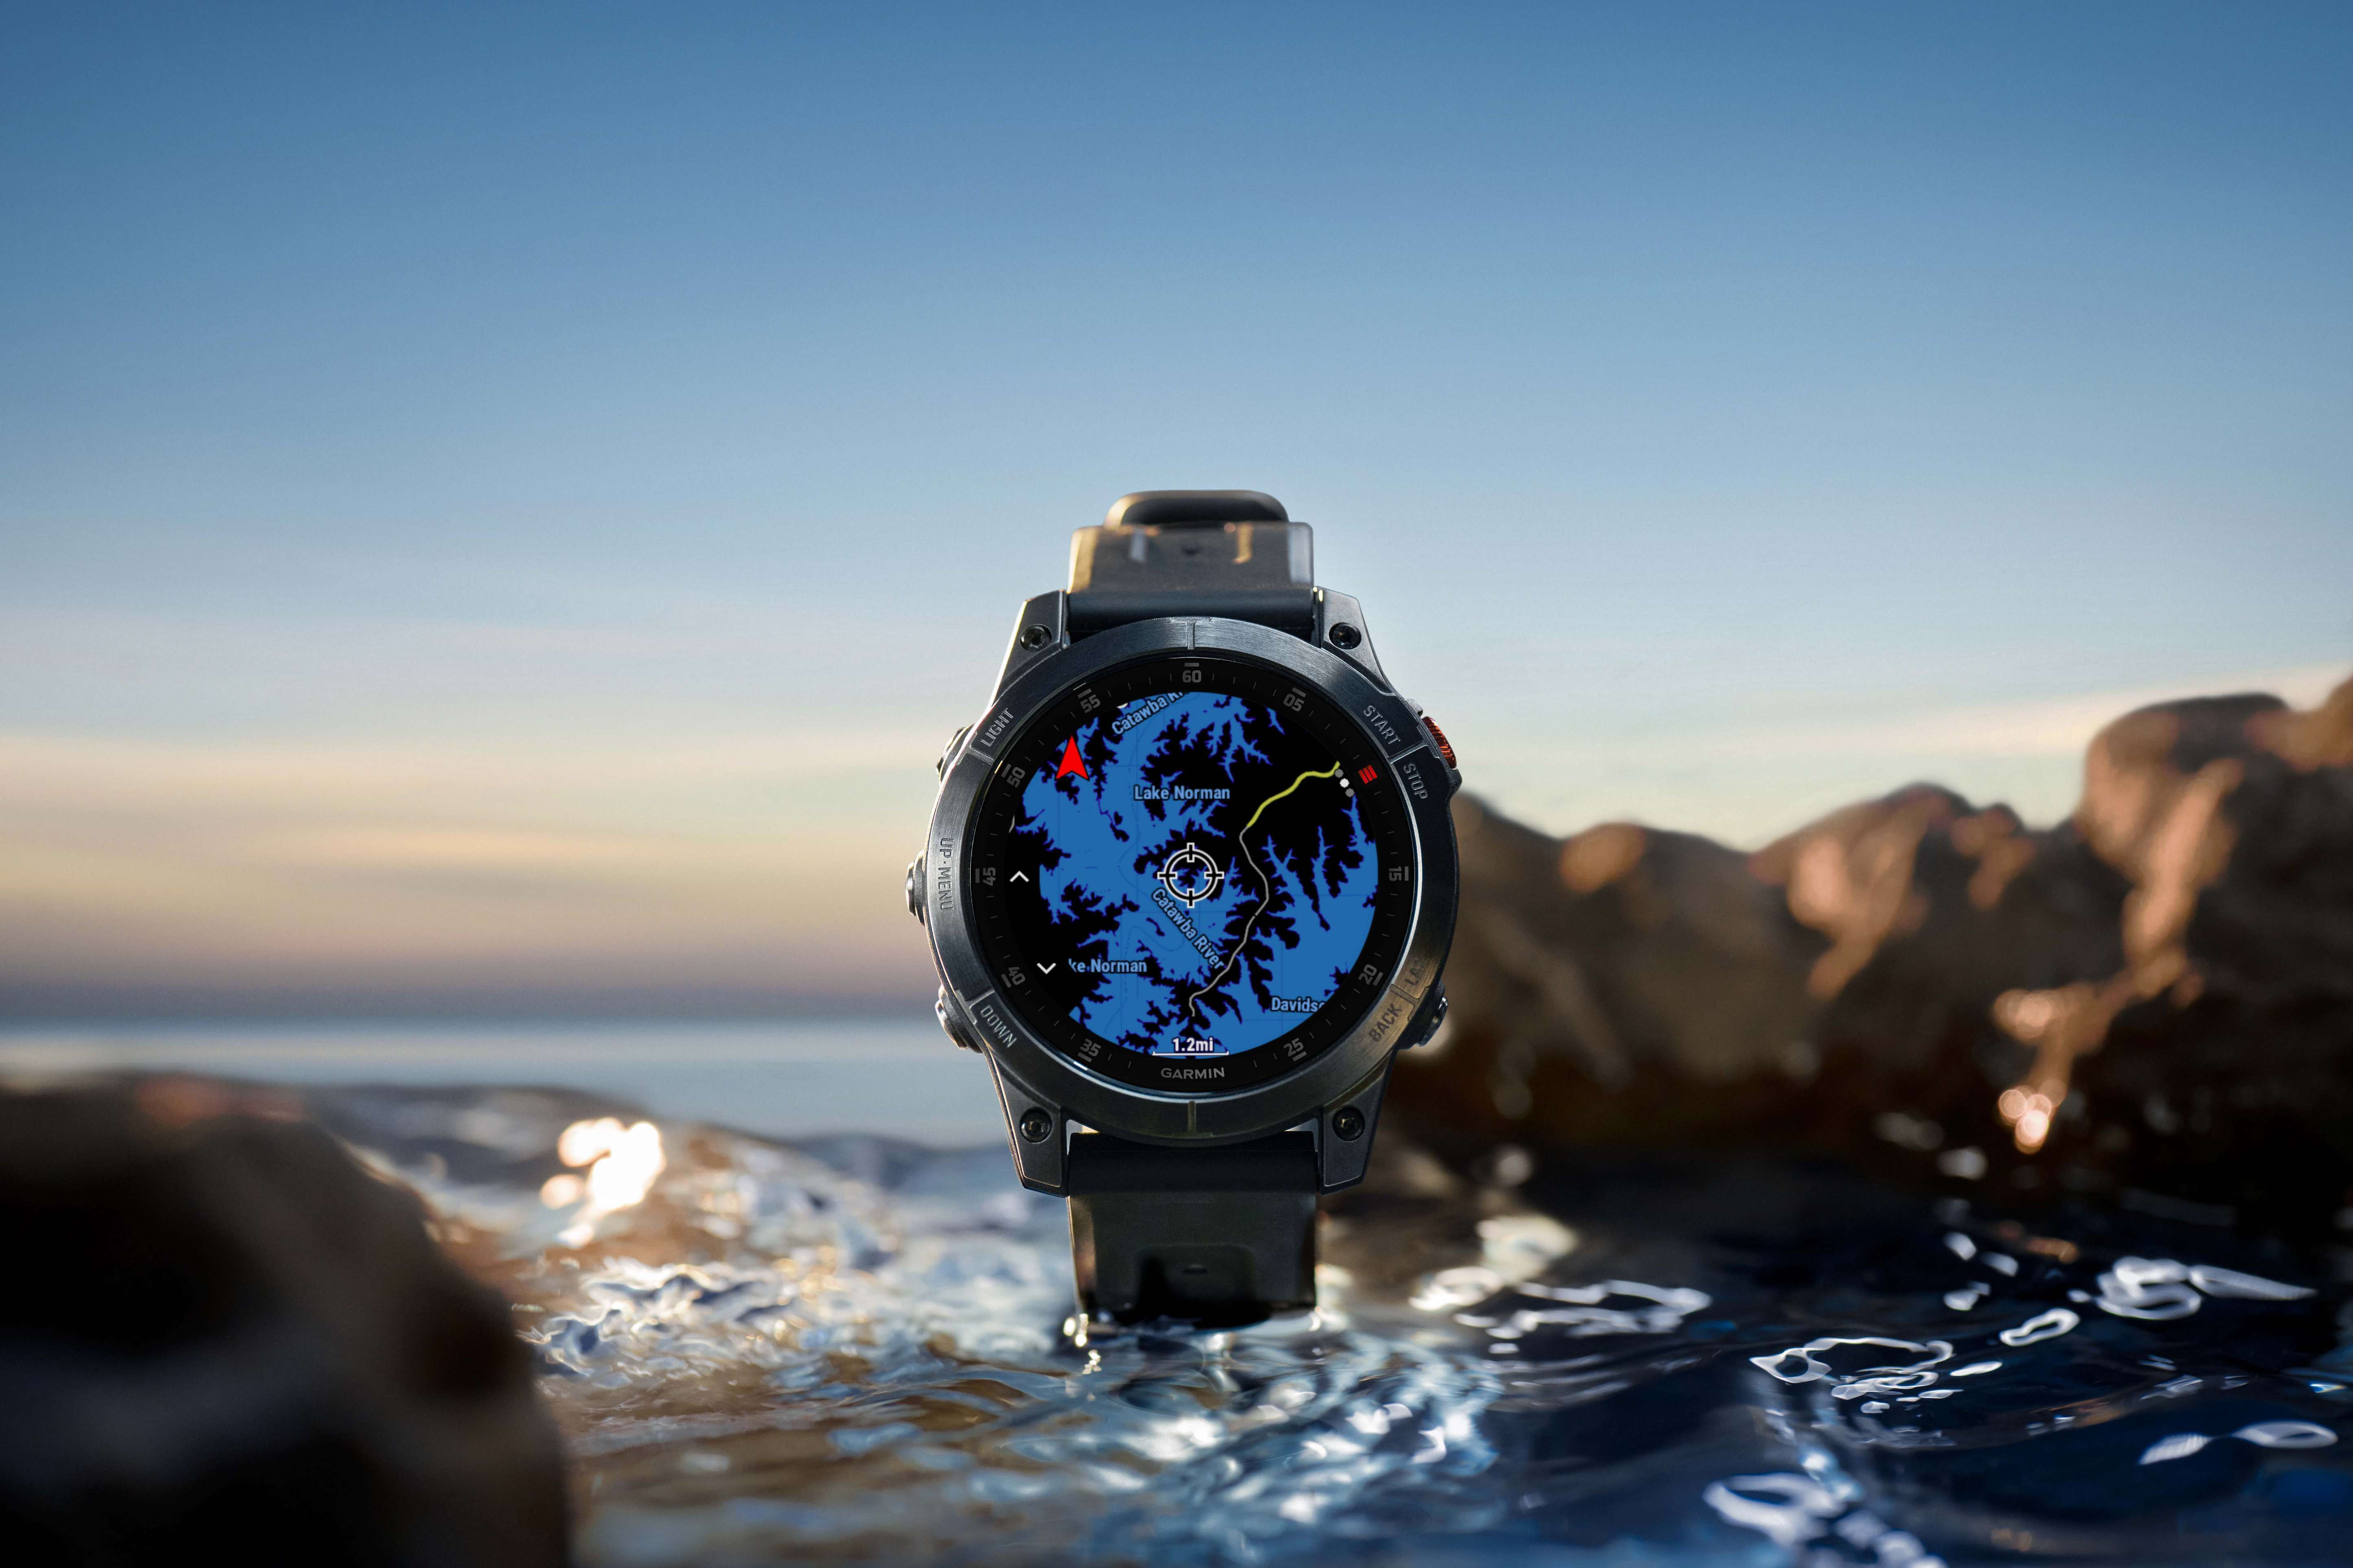 Challenge your limits and take on the outdoors with the all new Garmin Outdoor Series